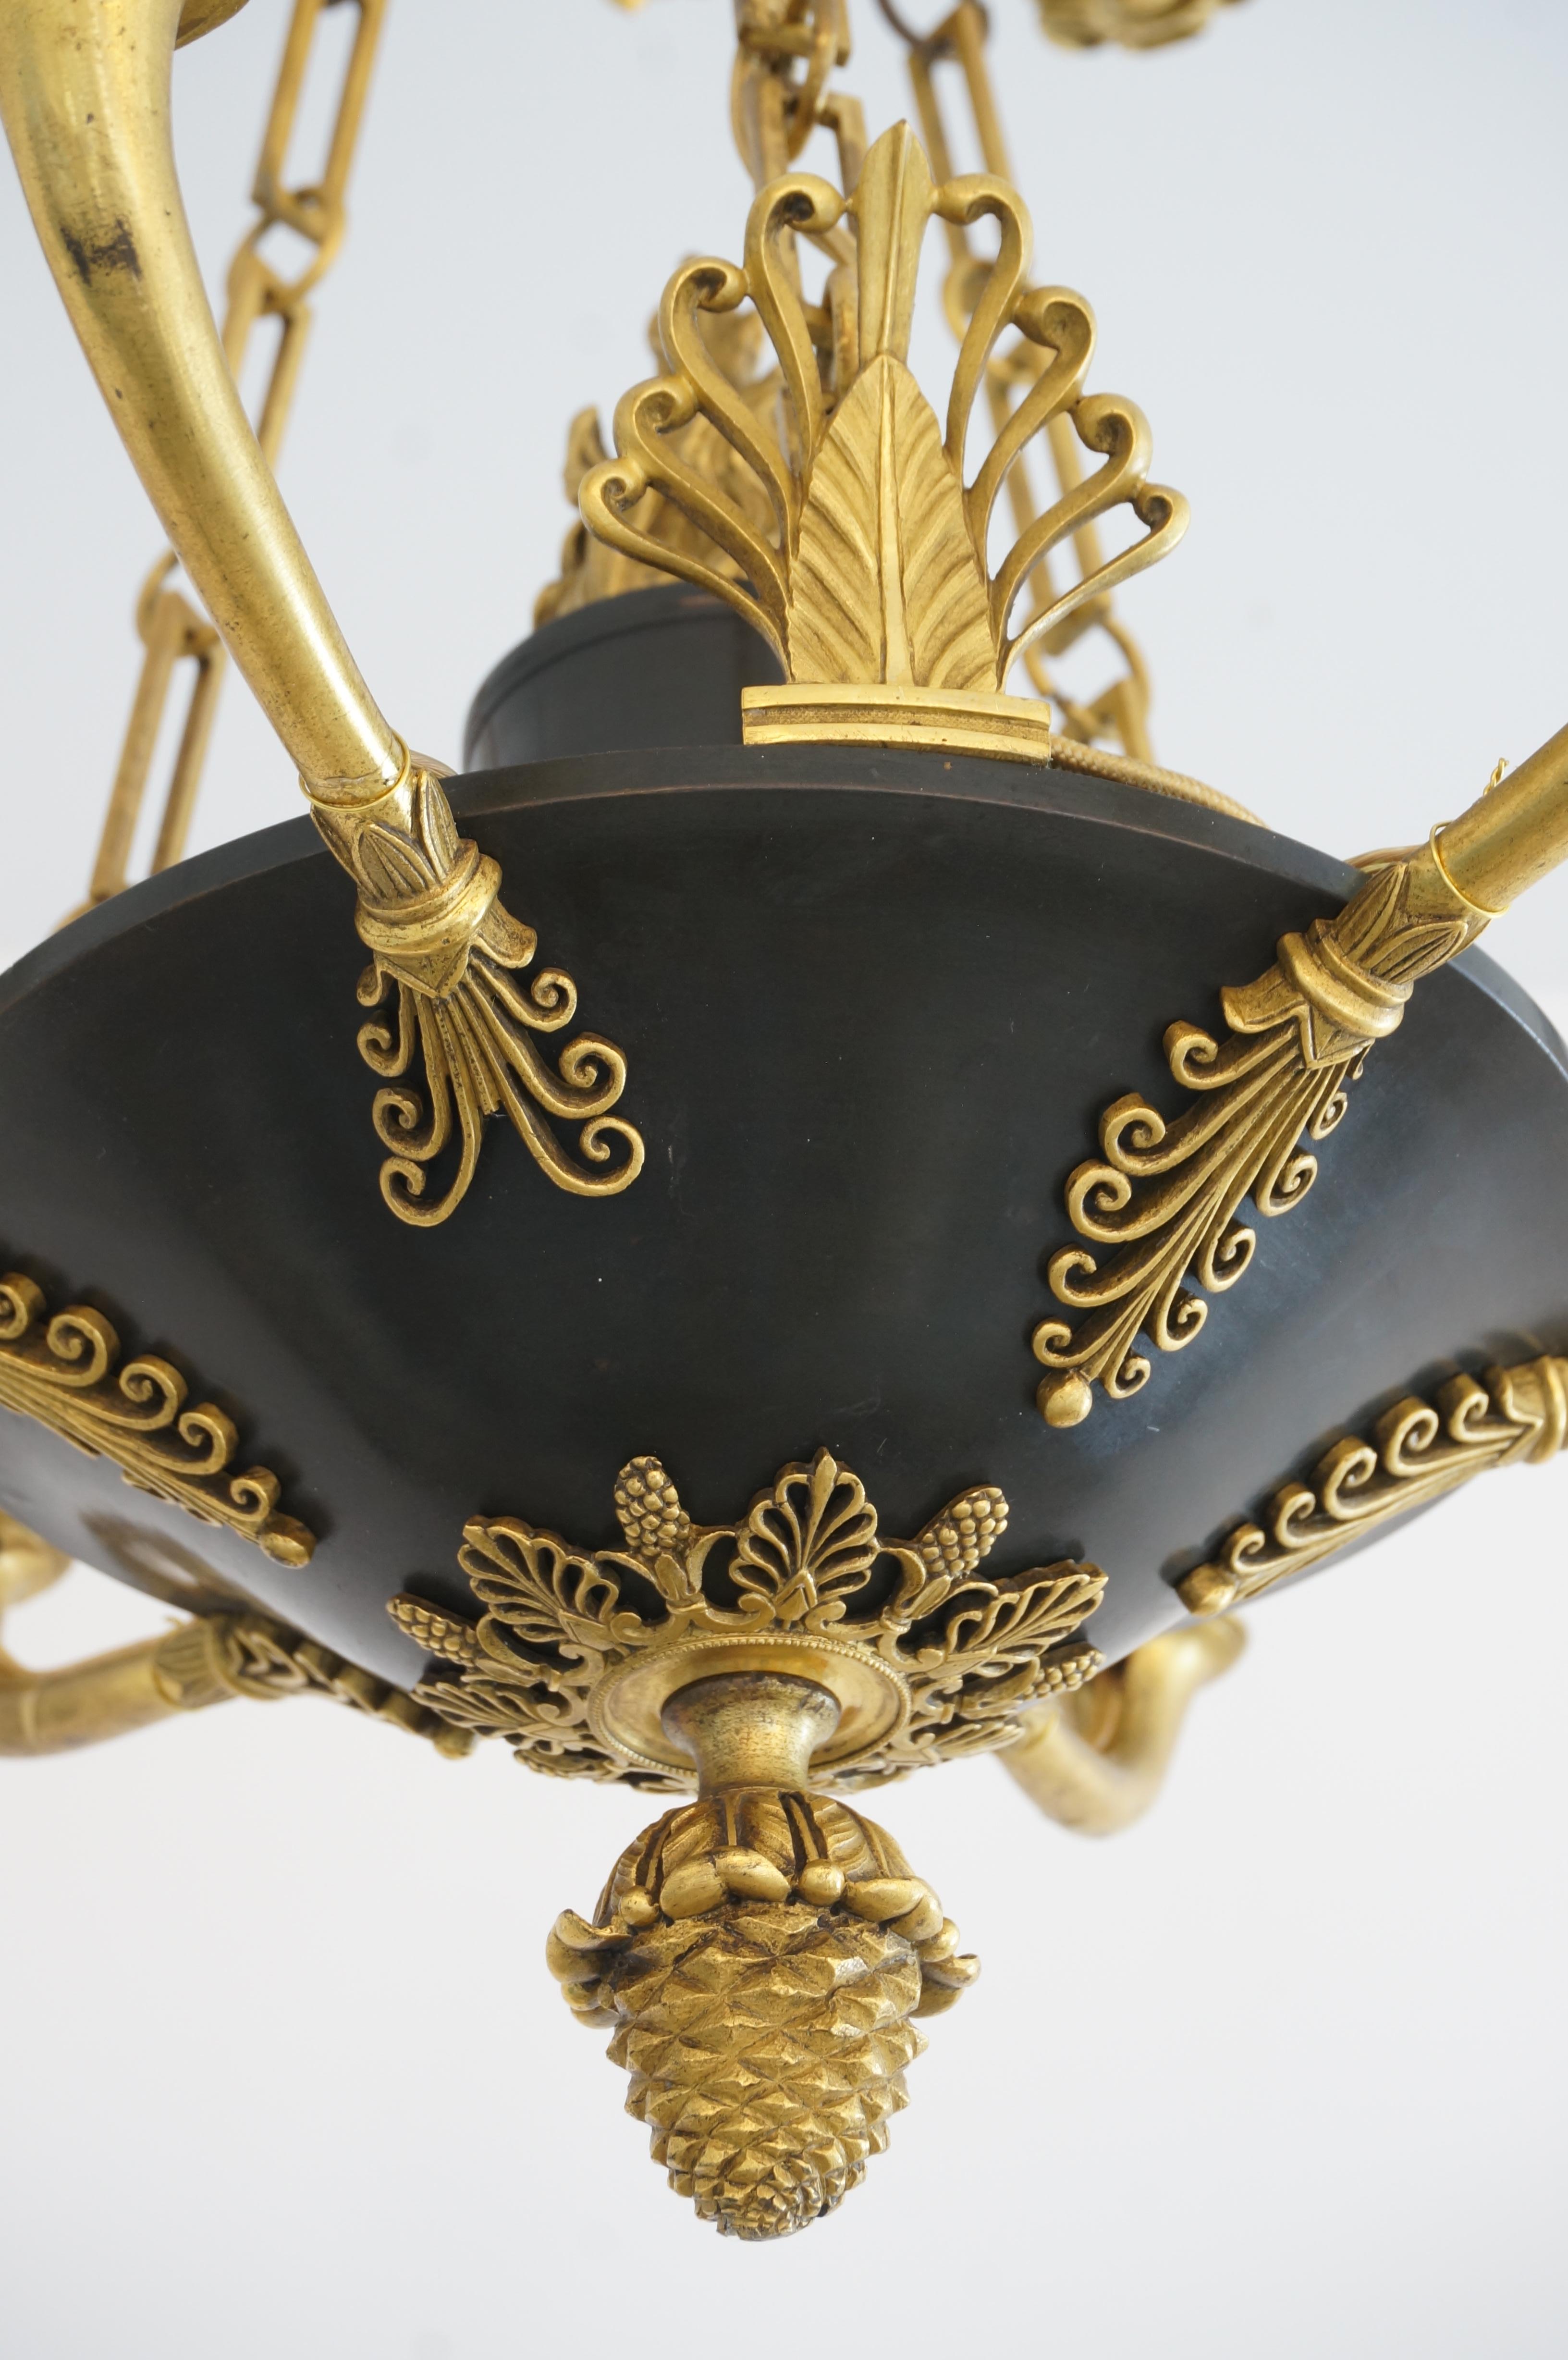 This stylish French Empire chandelier dates to the early part of the 19th century and is fabricated in bronze dore and patinated bronze.

Note: The piece has been professionally rewired and it requires six candleabra bulbs.

Note: Overall height